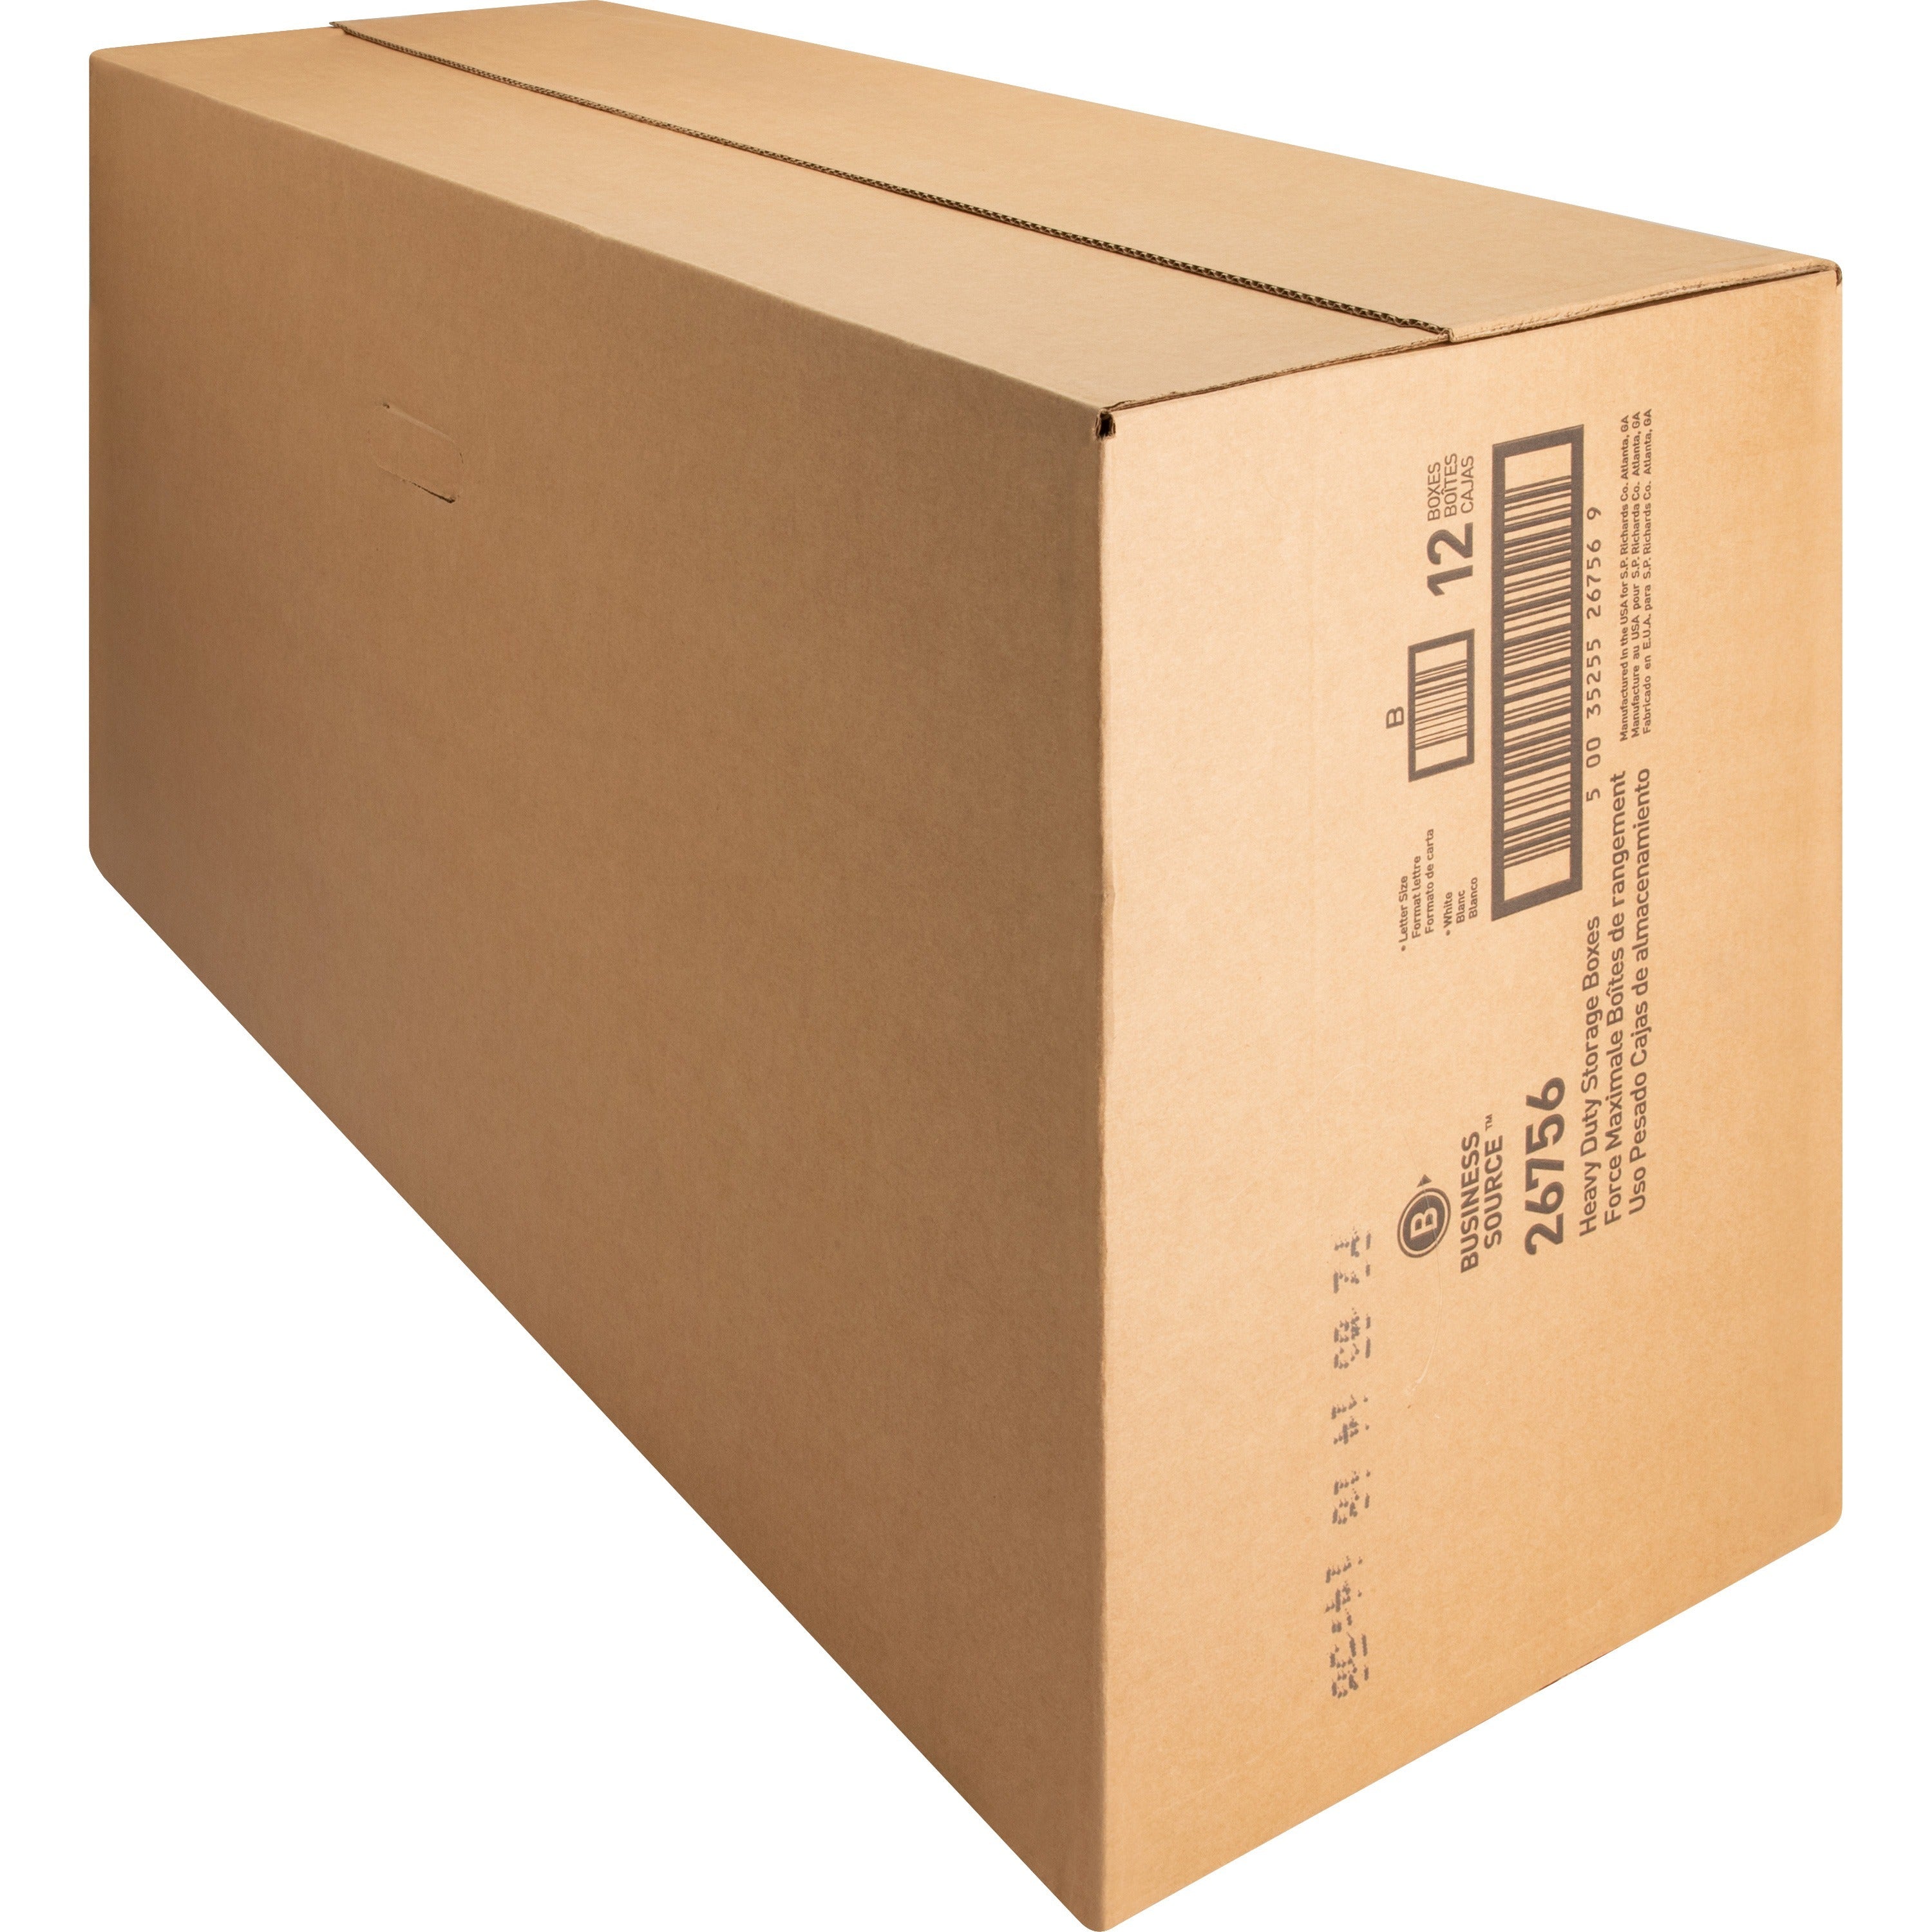 Business Source Heavy Duty Letter Size Storage Box - External Dimensions: 12" Width x 24" Depth x 10"Height - Media Size Supported: Letter - String/Button Tie Closure - Medium Duty - Stackable - White - For File - Recycled - 12 / Carton - 